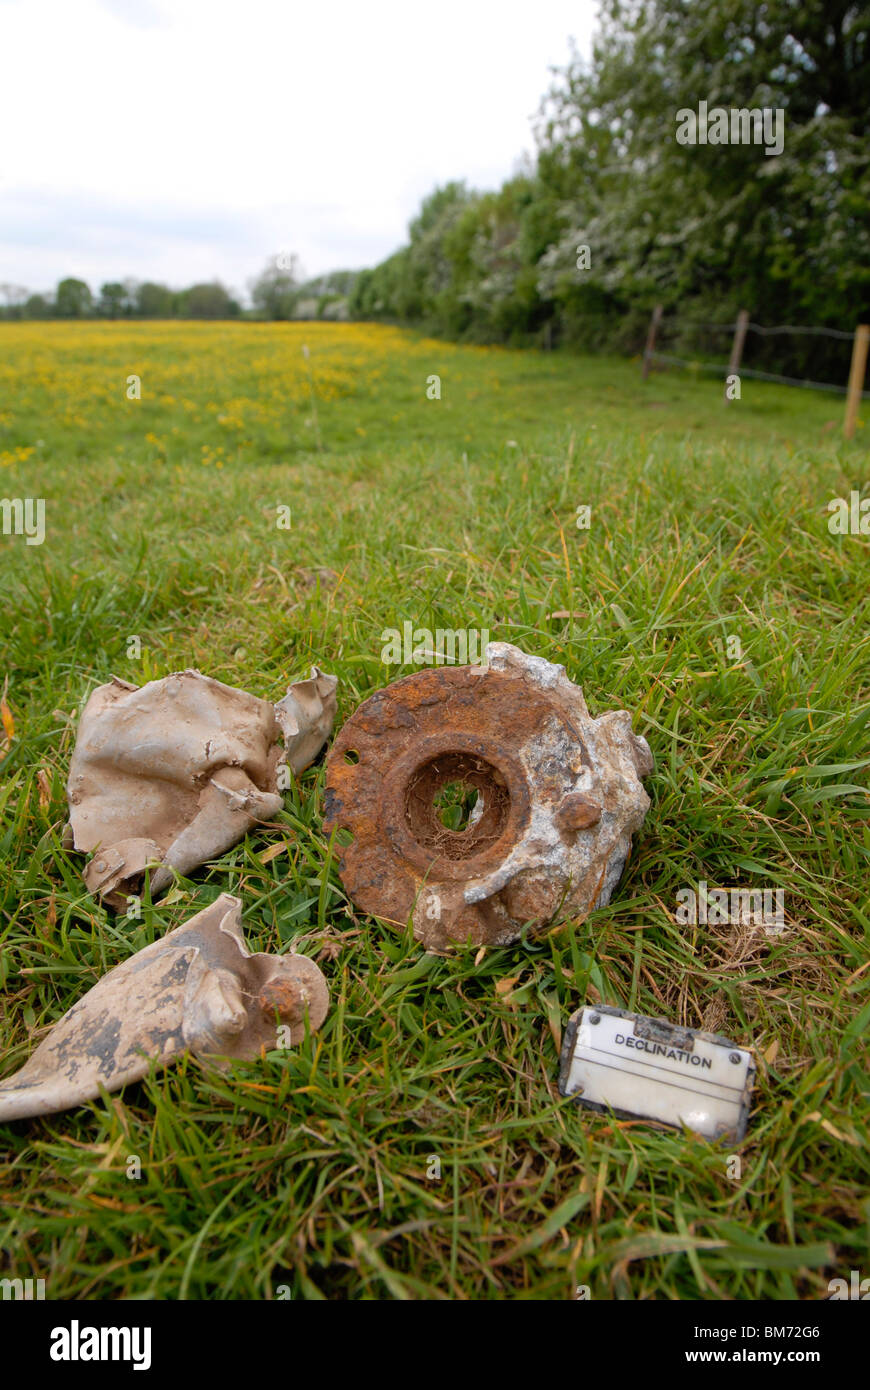 Pieces of crashed aircraft at the spot at Hoveringham Pastures, Notts., where two Lancaster bombers crashed during WWII Stock Photo